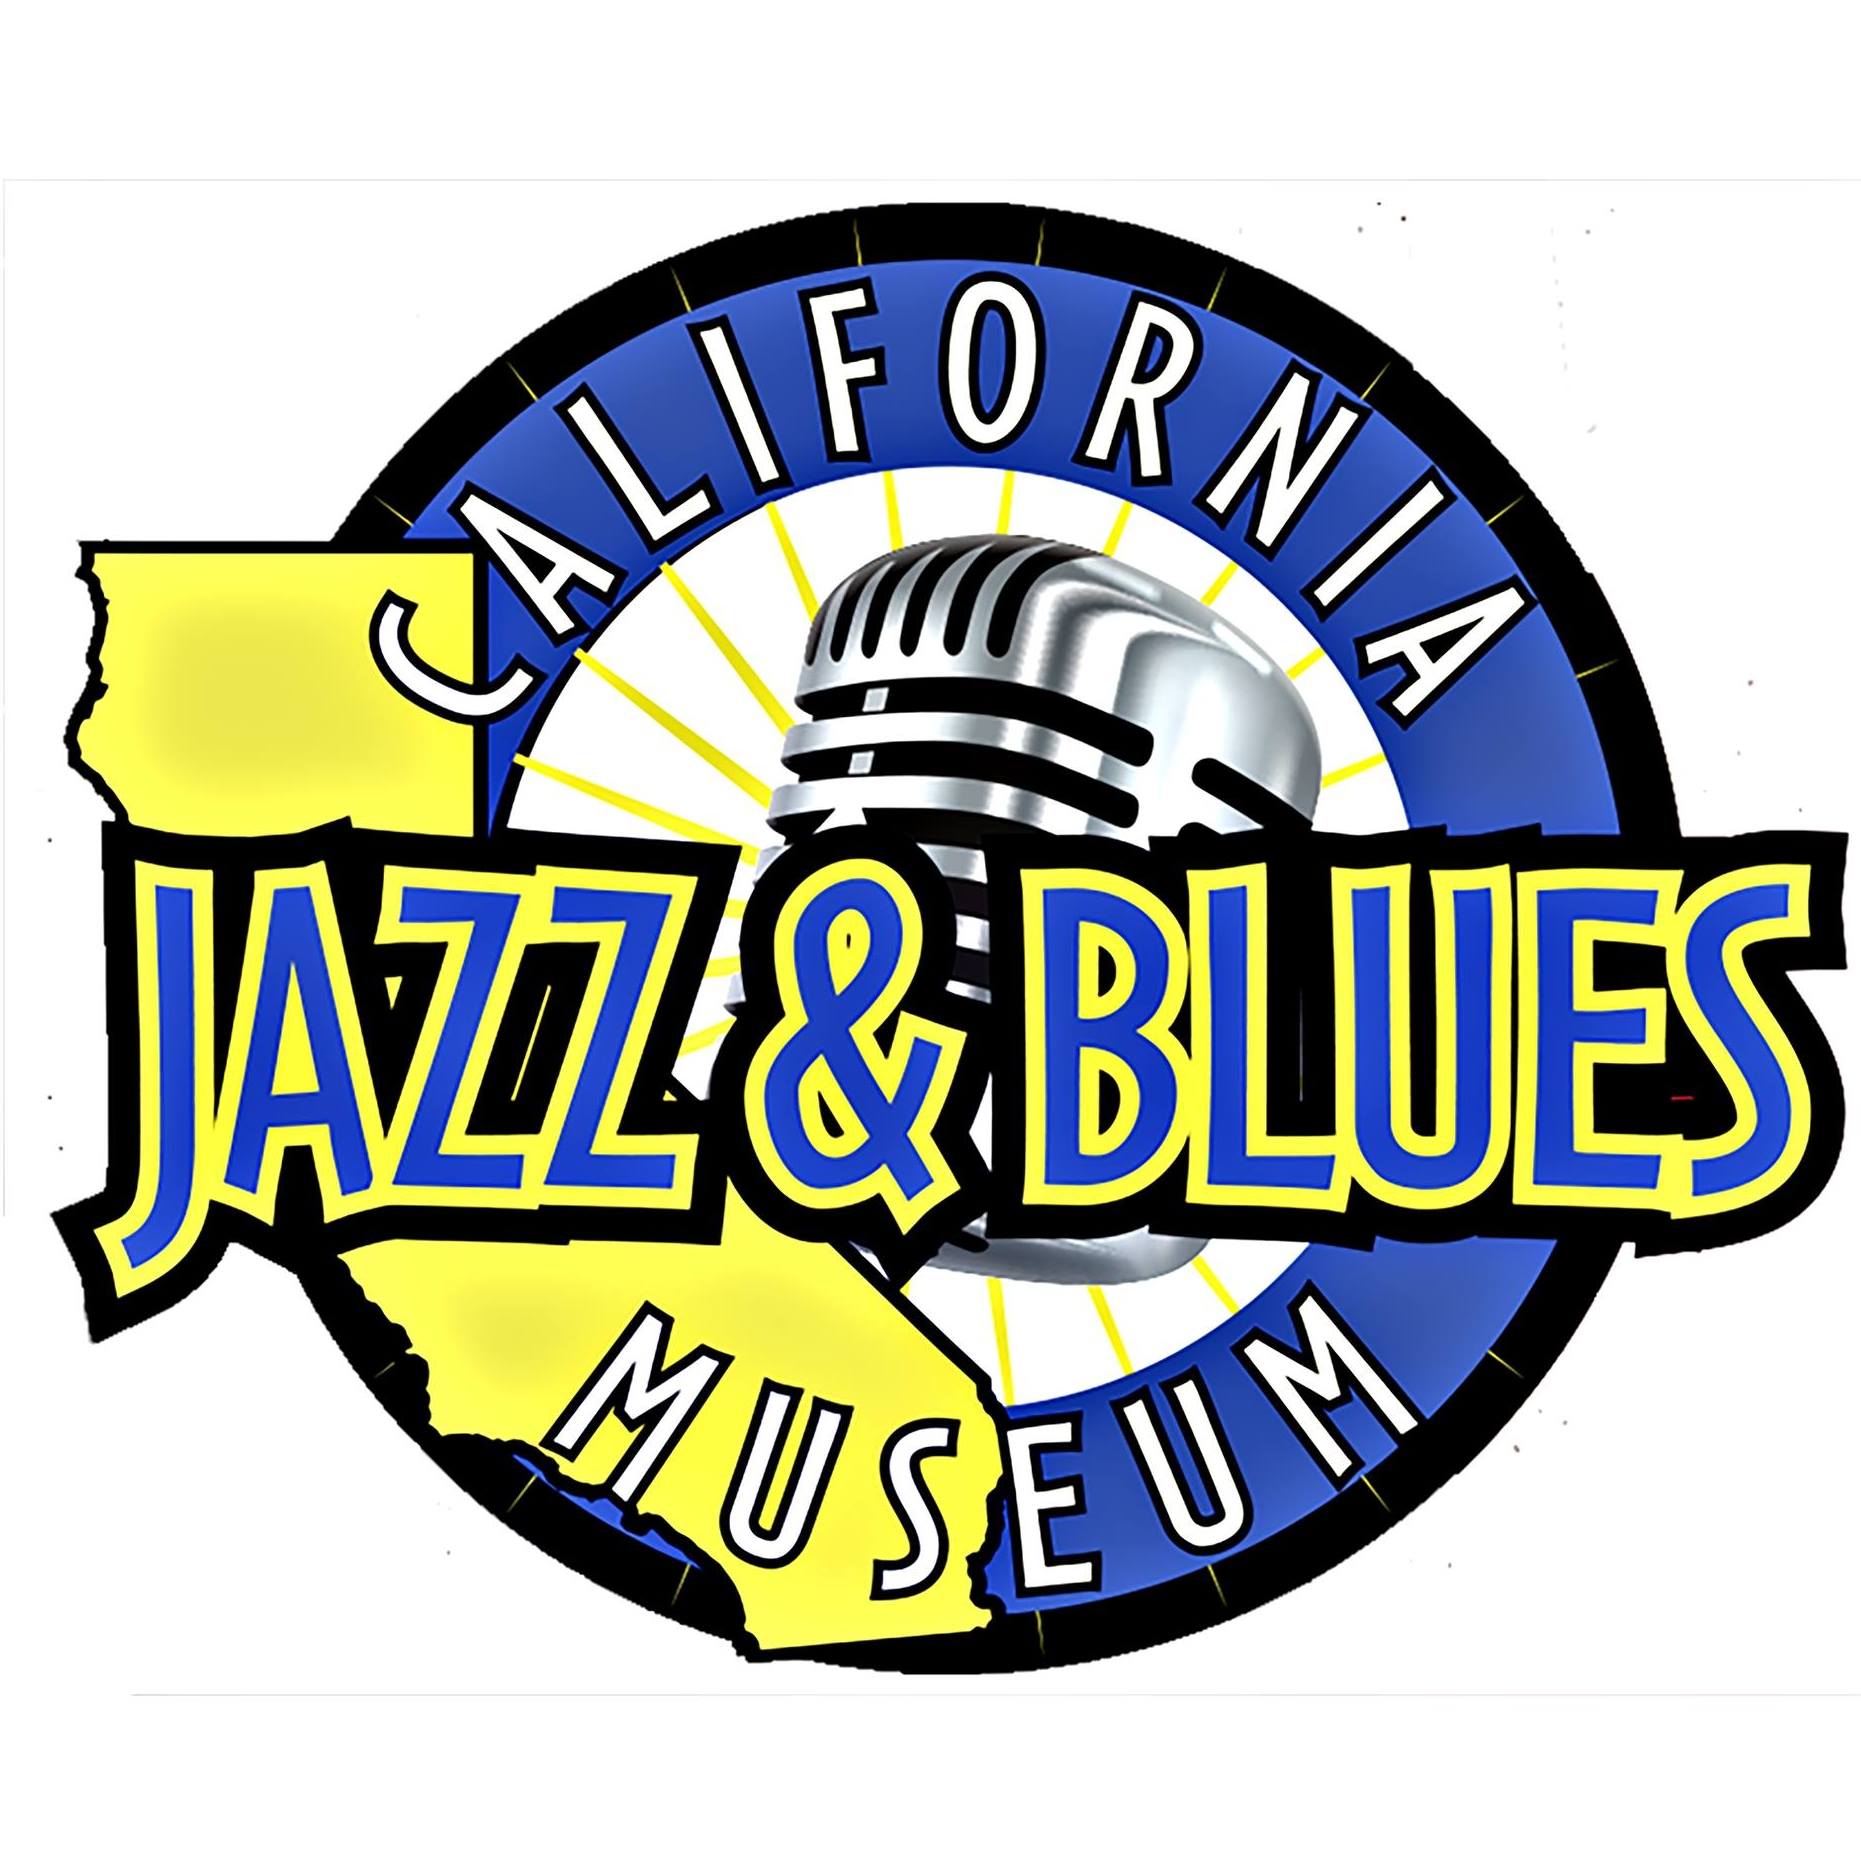 California Jazz and Blues Museum